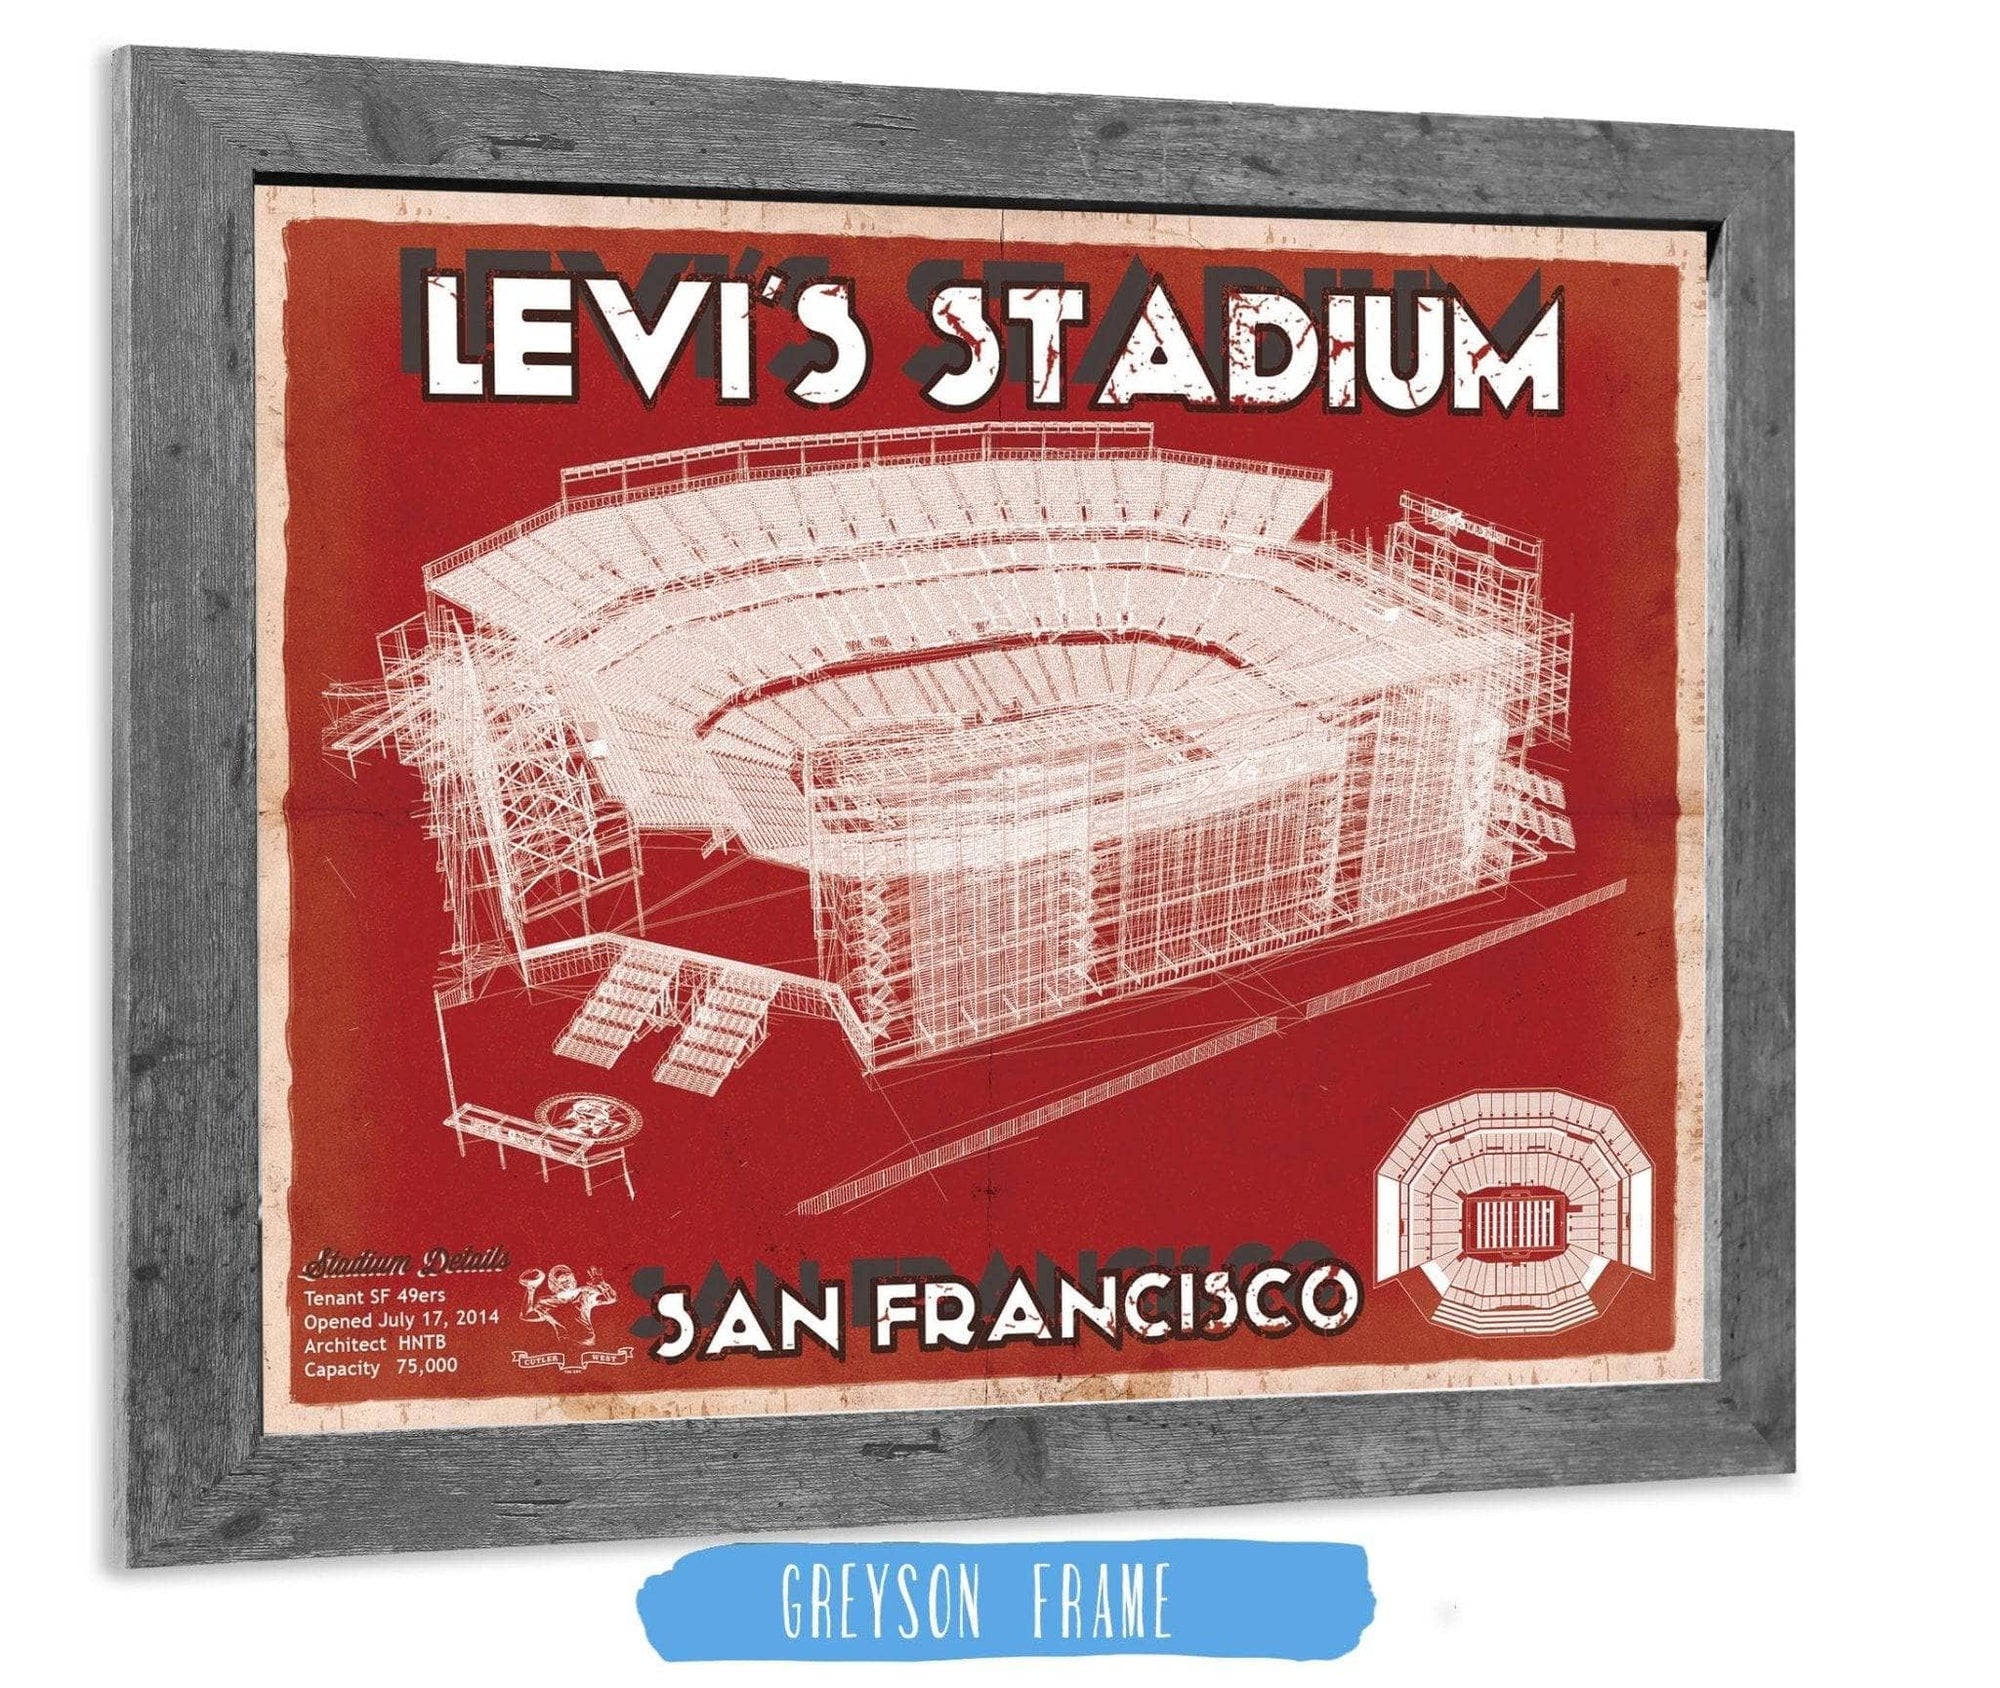 Cutler West Pro Football Collection 14" x 11" / Greyson Frame San Francisco 49ers - Levi's Stadium Seating Chart - Vintage Football Print 698227176-TOP